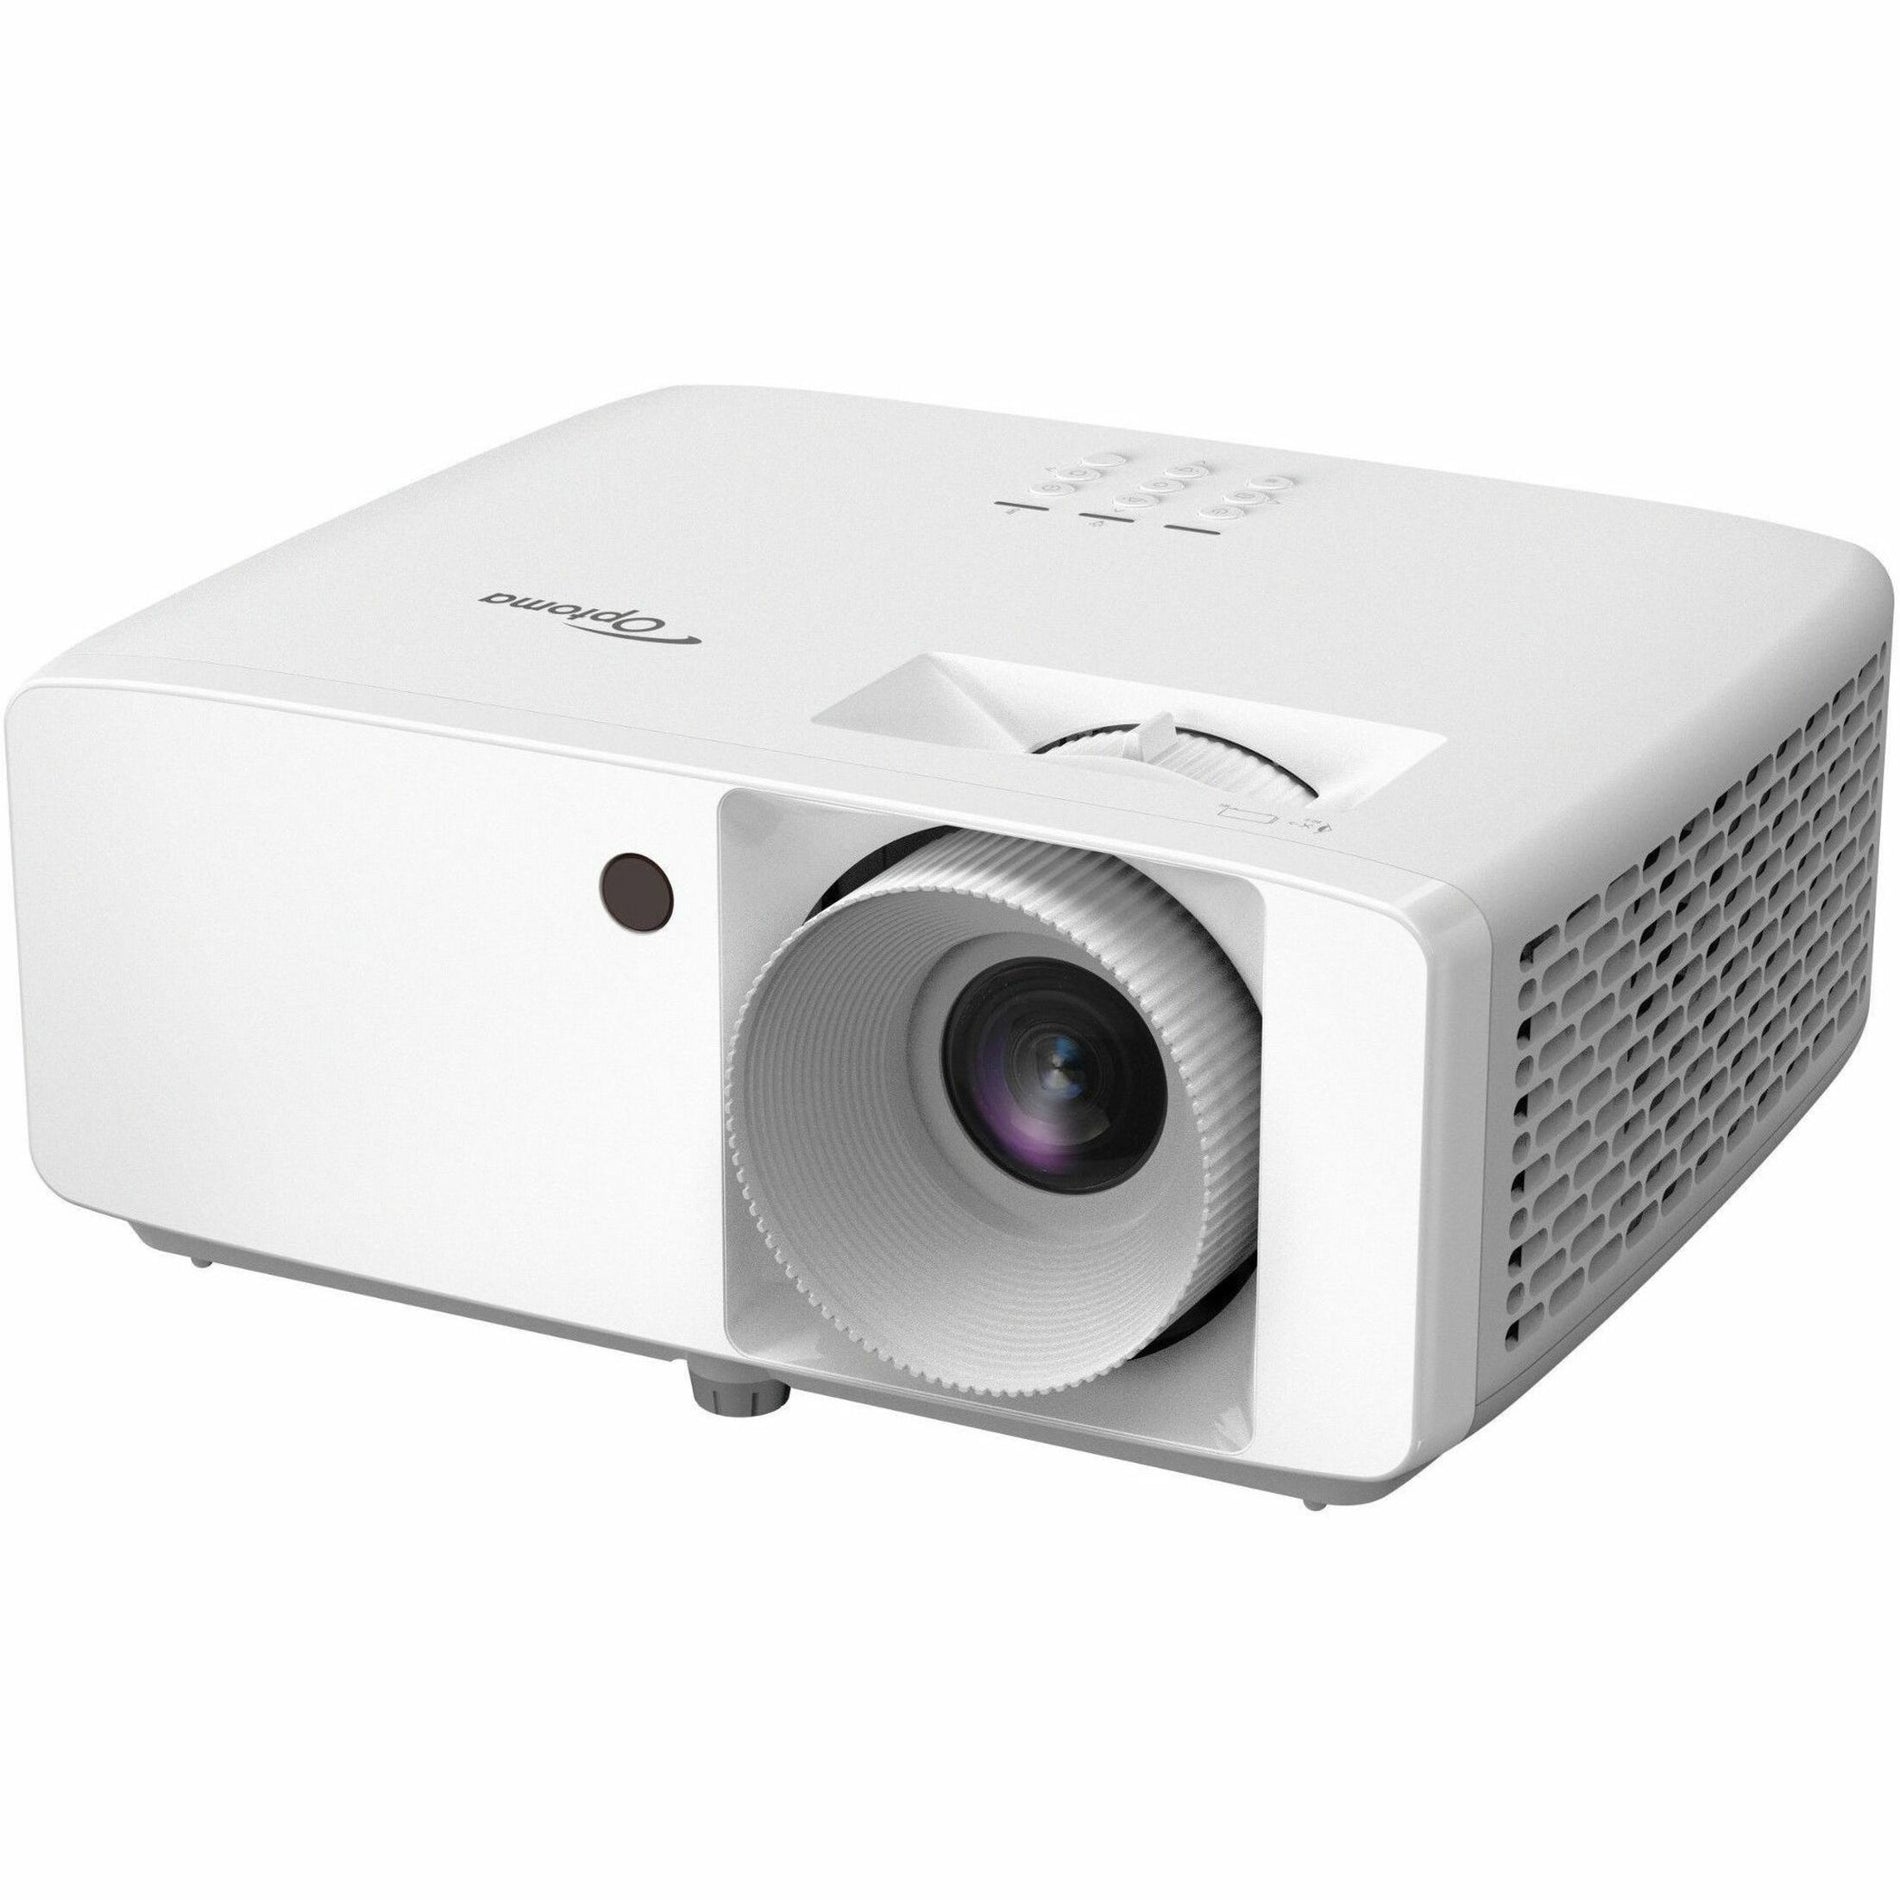 Optoma ZX350E ZX350e Compact High Brightness Laser Projector, 4:3 Aspect Ratio, 3700 lm, 300,000:1 Contrast Ratio, 1080p Output